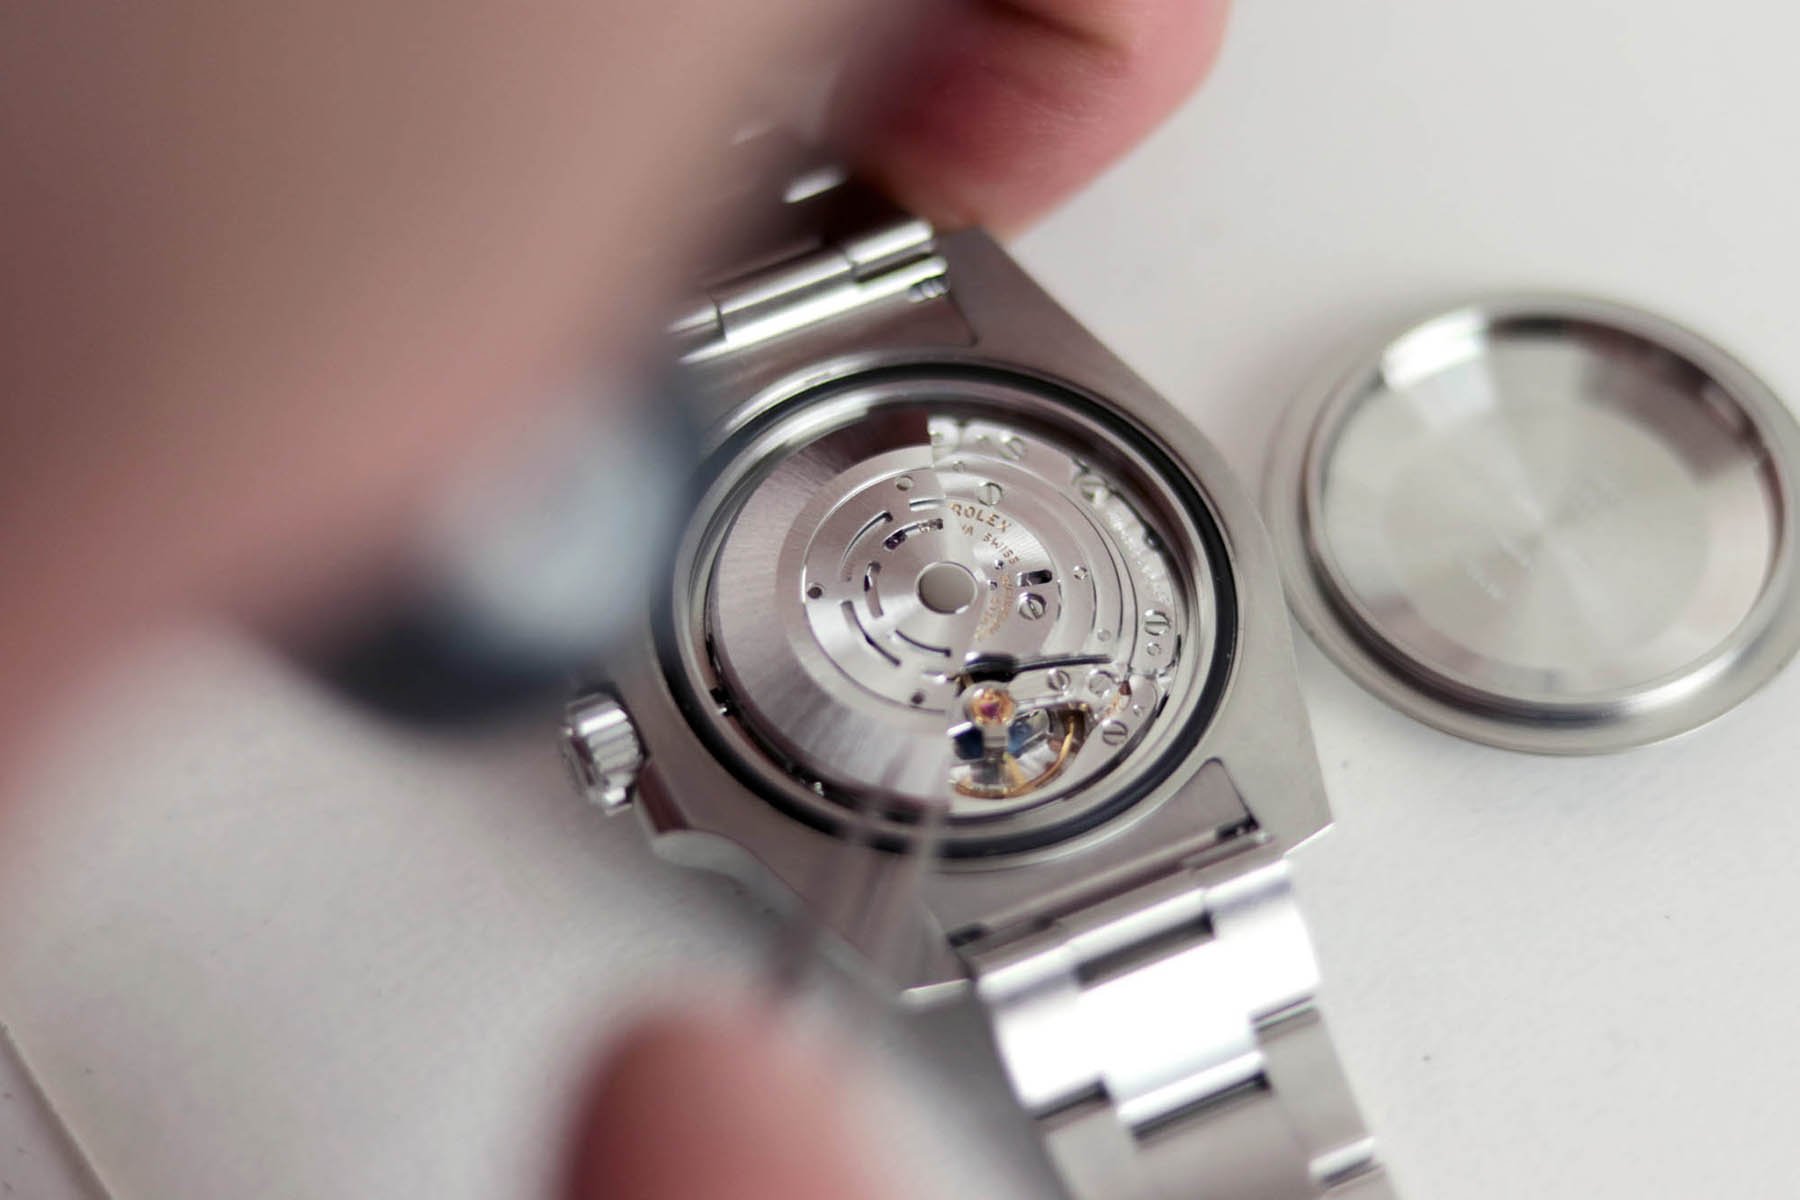 Why Don’t Some Watchmakers Like To Service Vintage Watches?